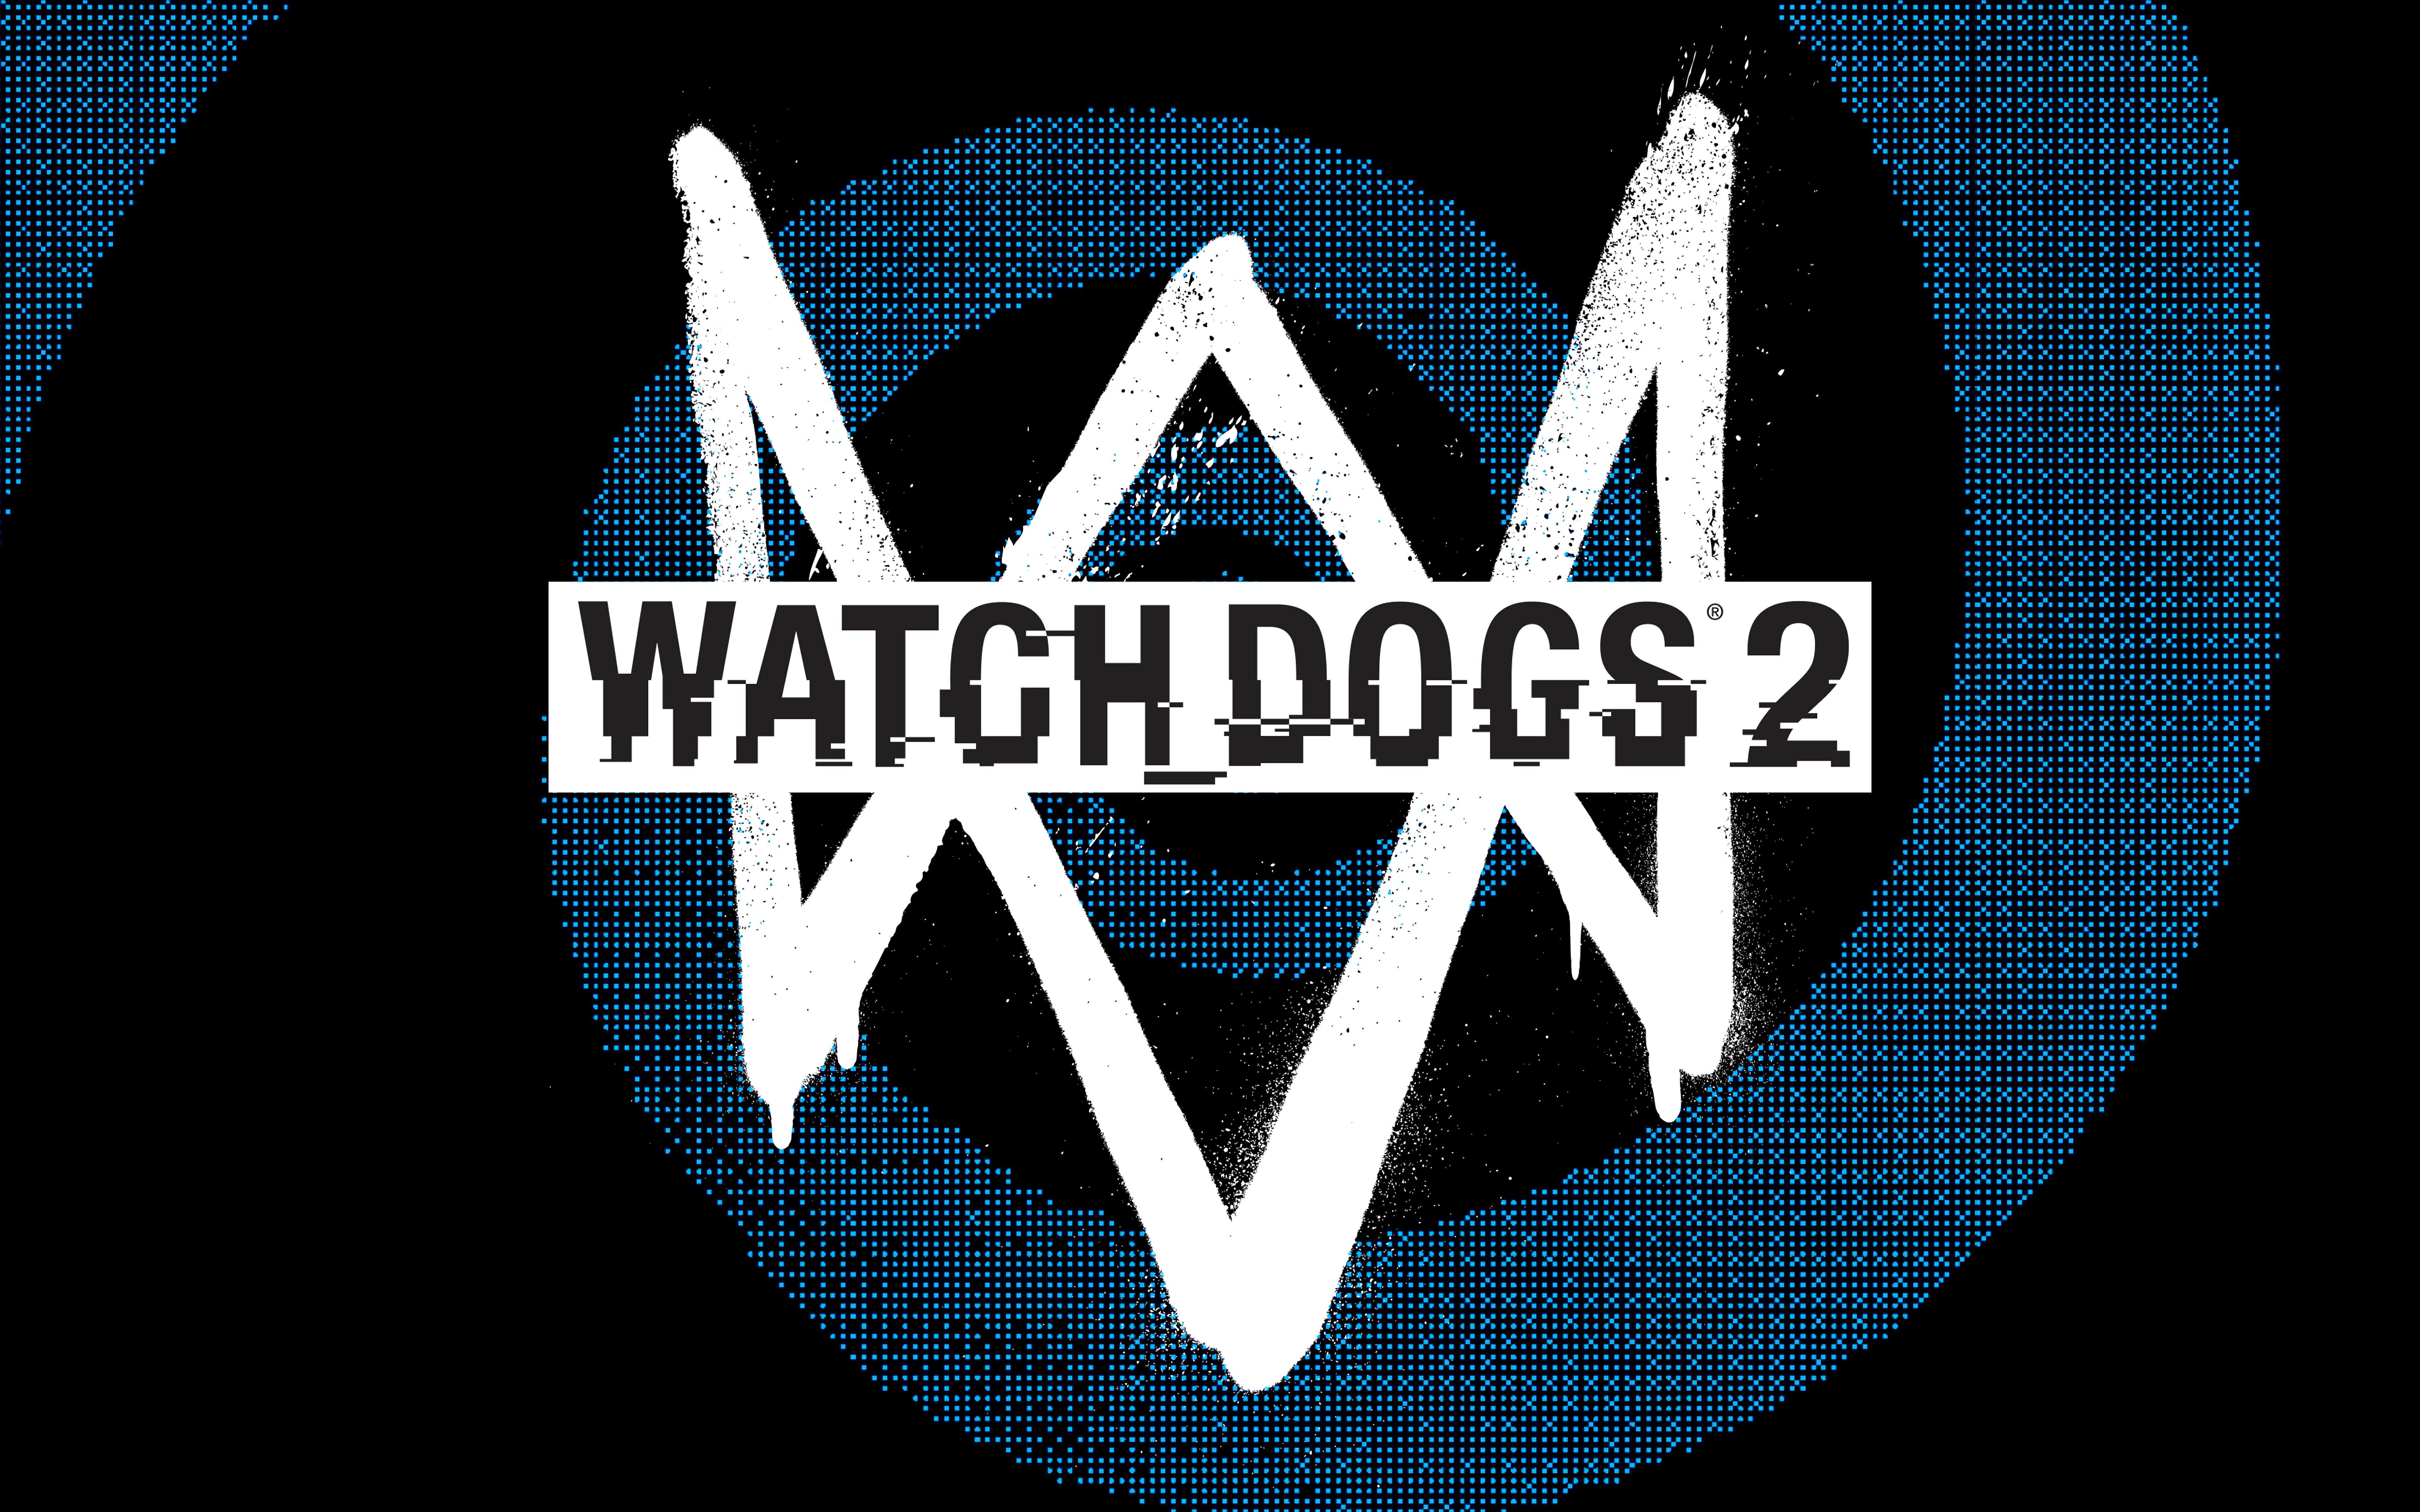 watch dogs, video game, watch dogs 2, logo